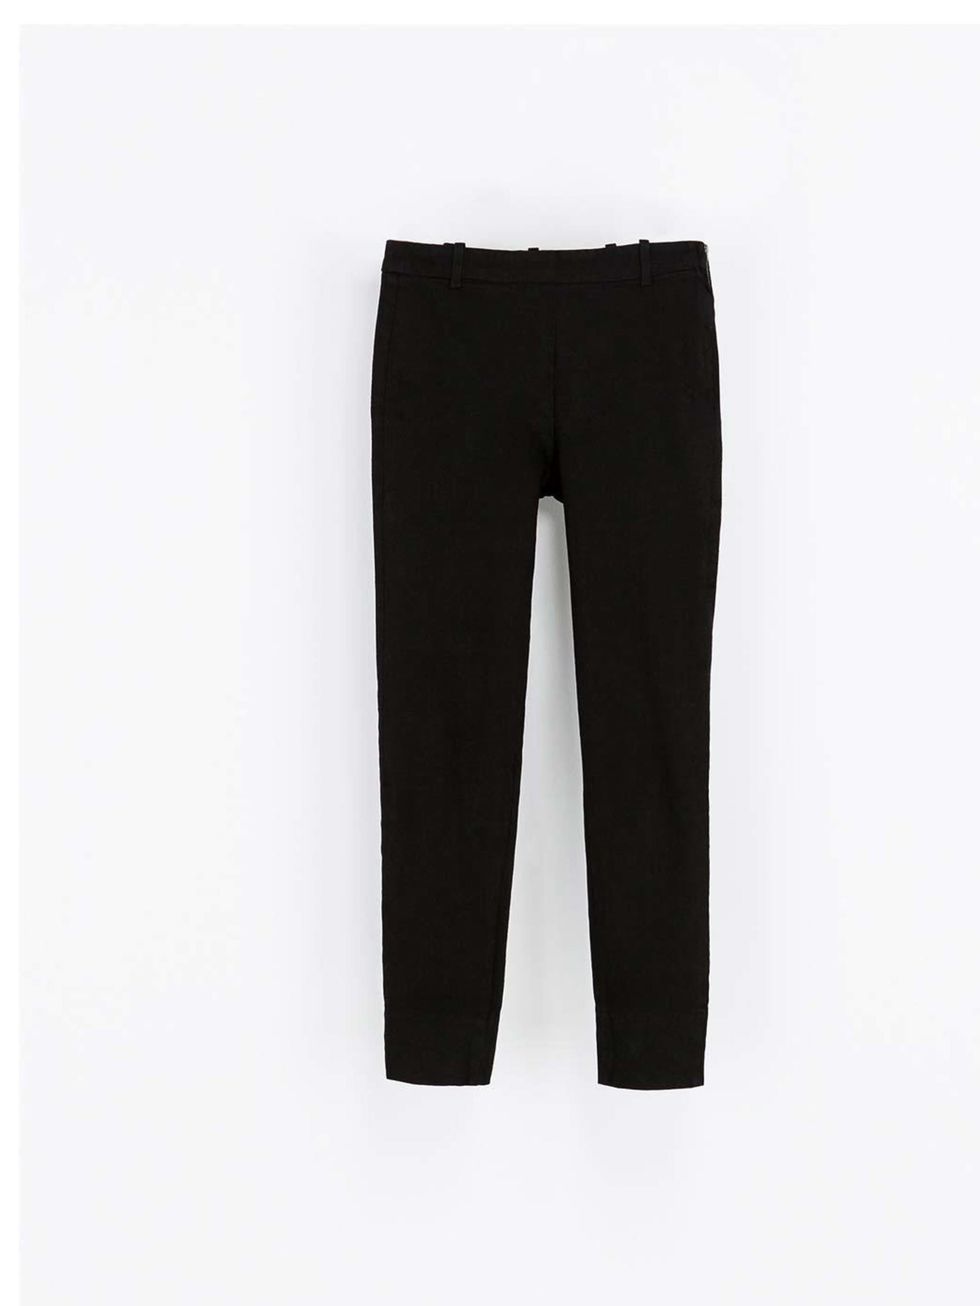 <p>Wear with a pair of basic black tailored trousers. Ideal for day and night.</p><p><a href="http://www.zara.com/uk/en/woman/trousers/jeans-with-side-zip-c436519p1607008.html">Zara</a>, £9.99</p>